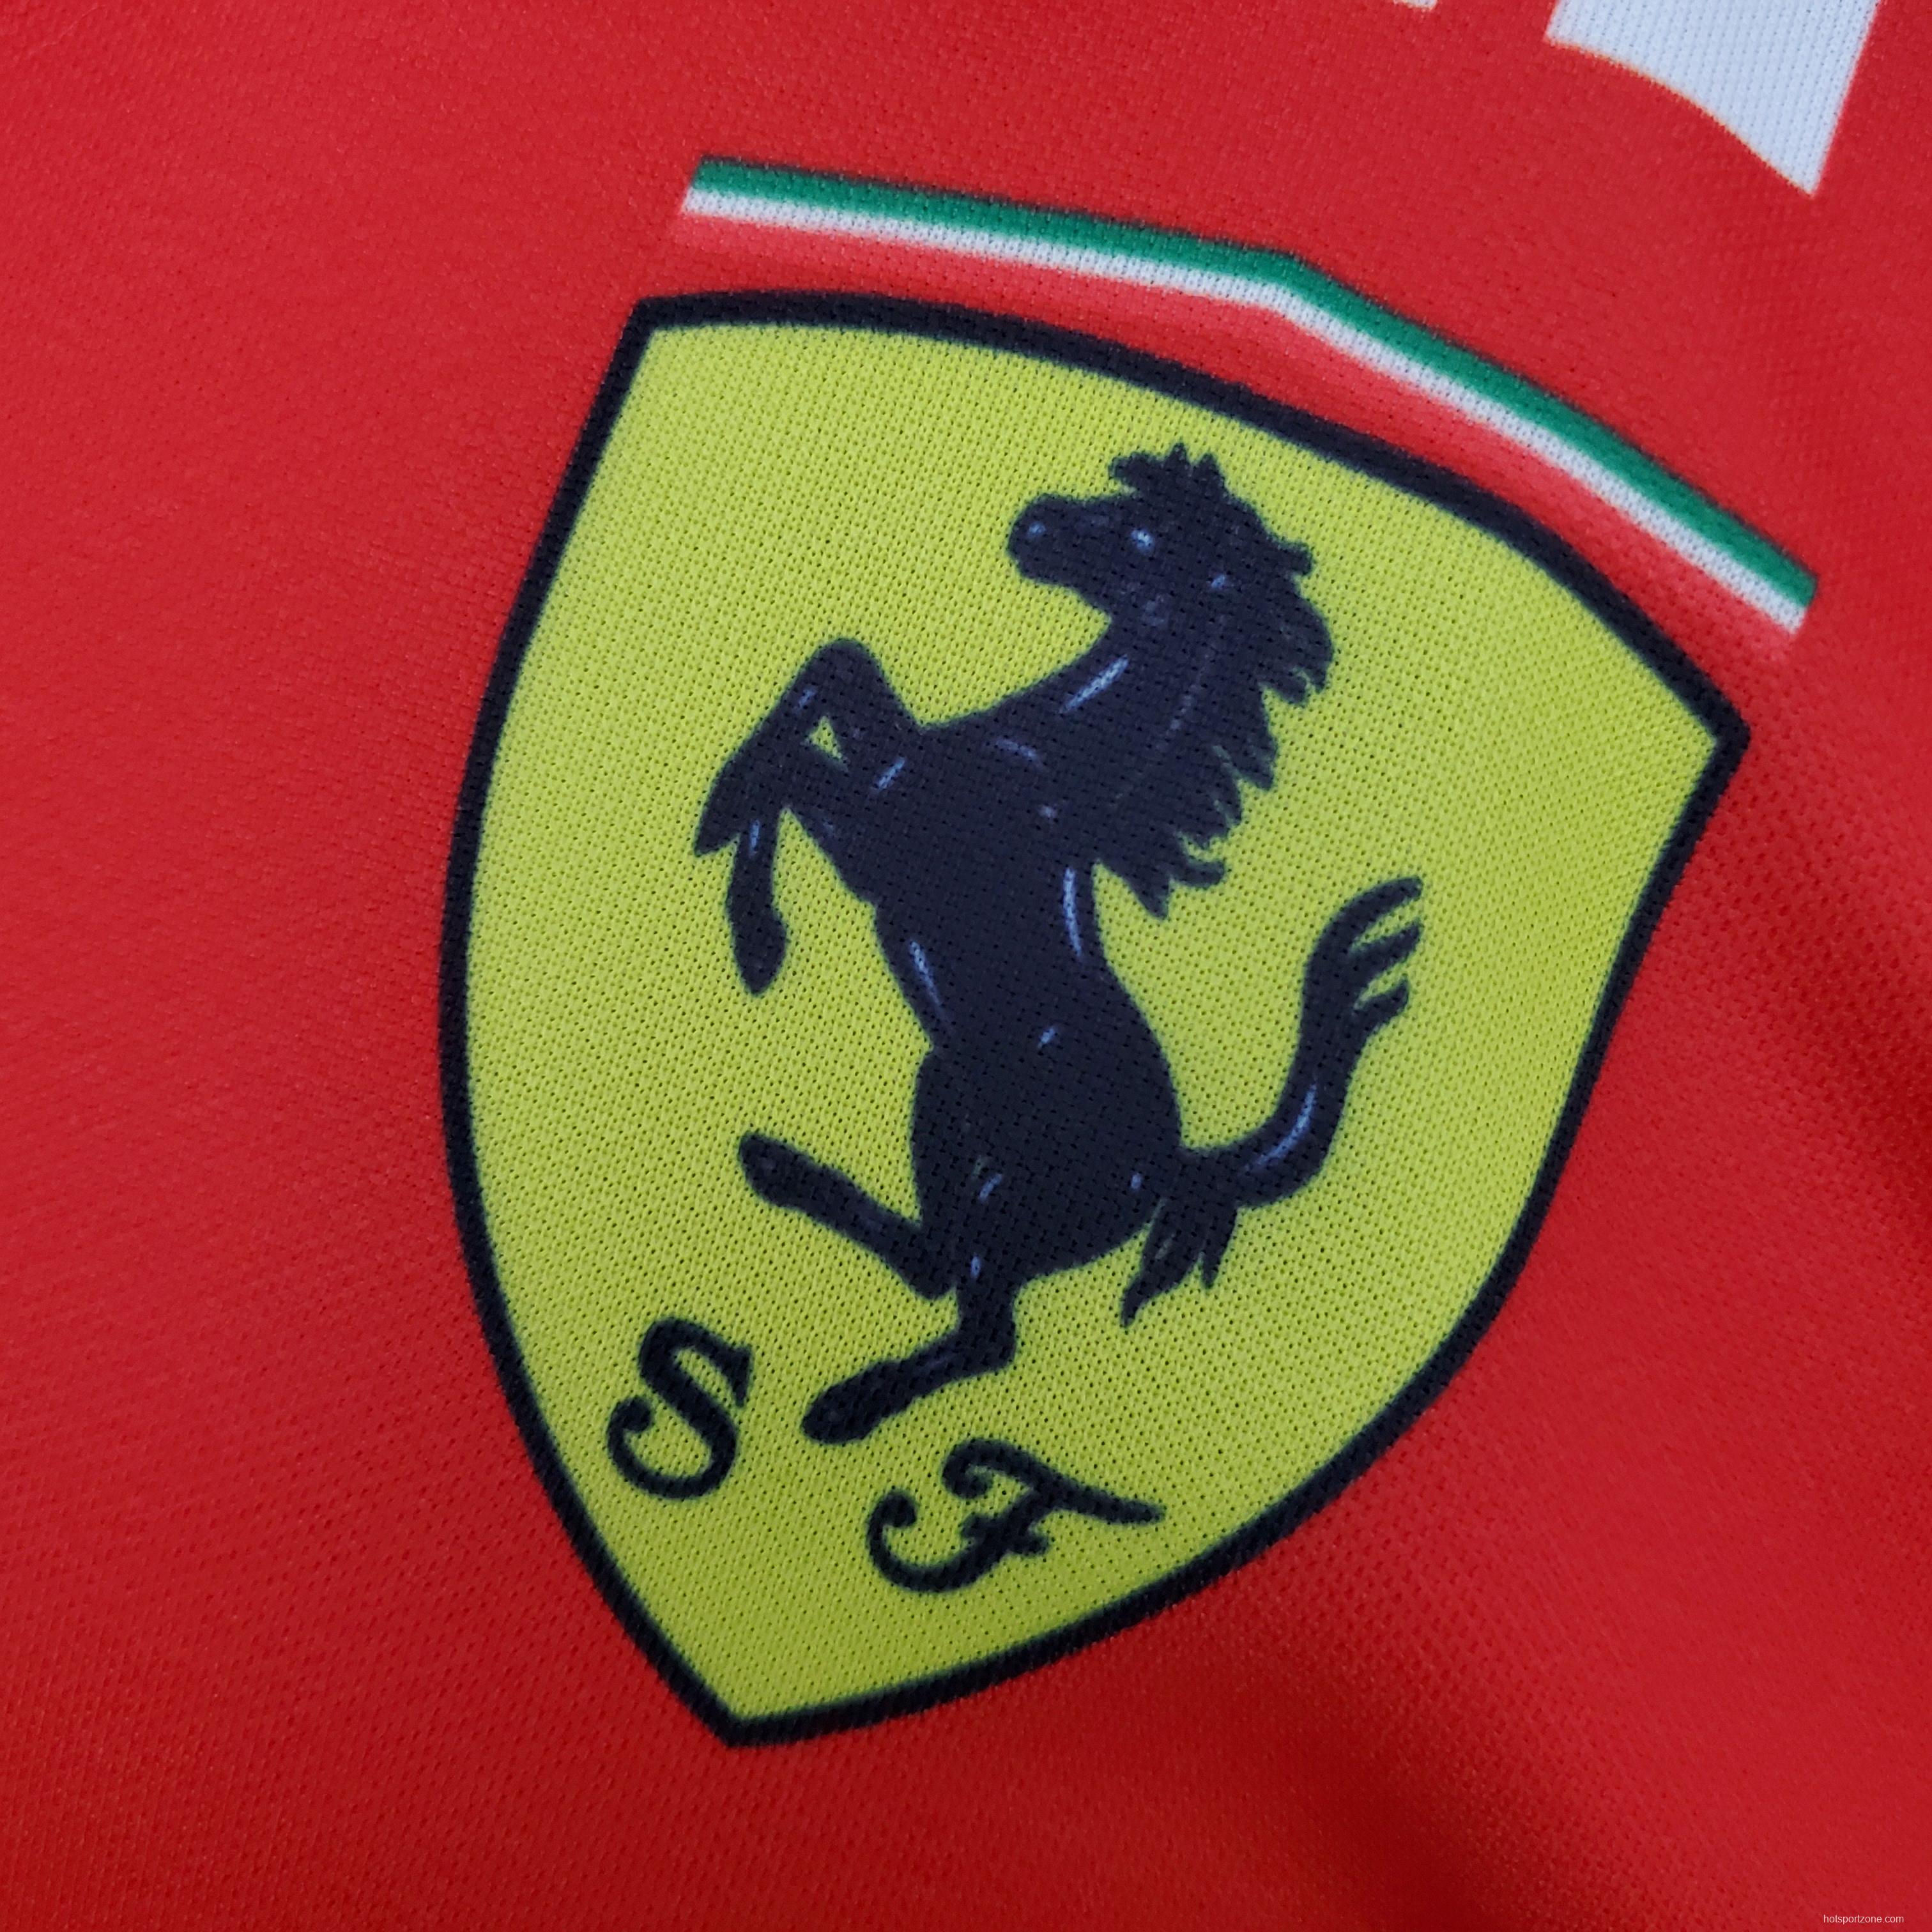 F1 Formula One; Ferrari racing suit Polo red S-5XL